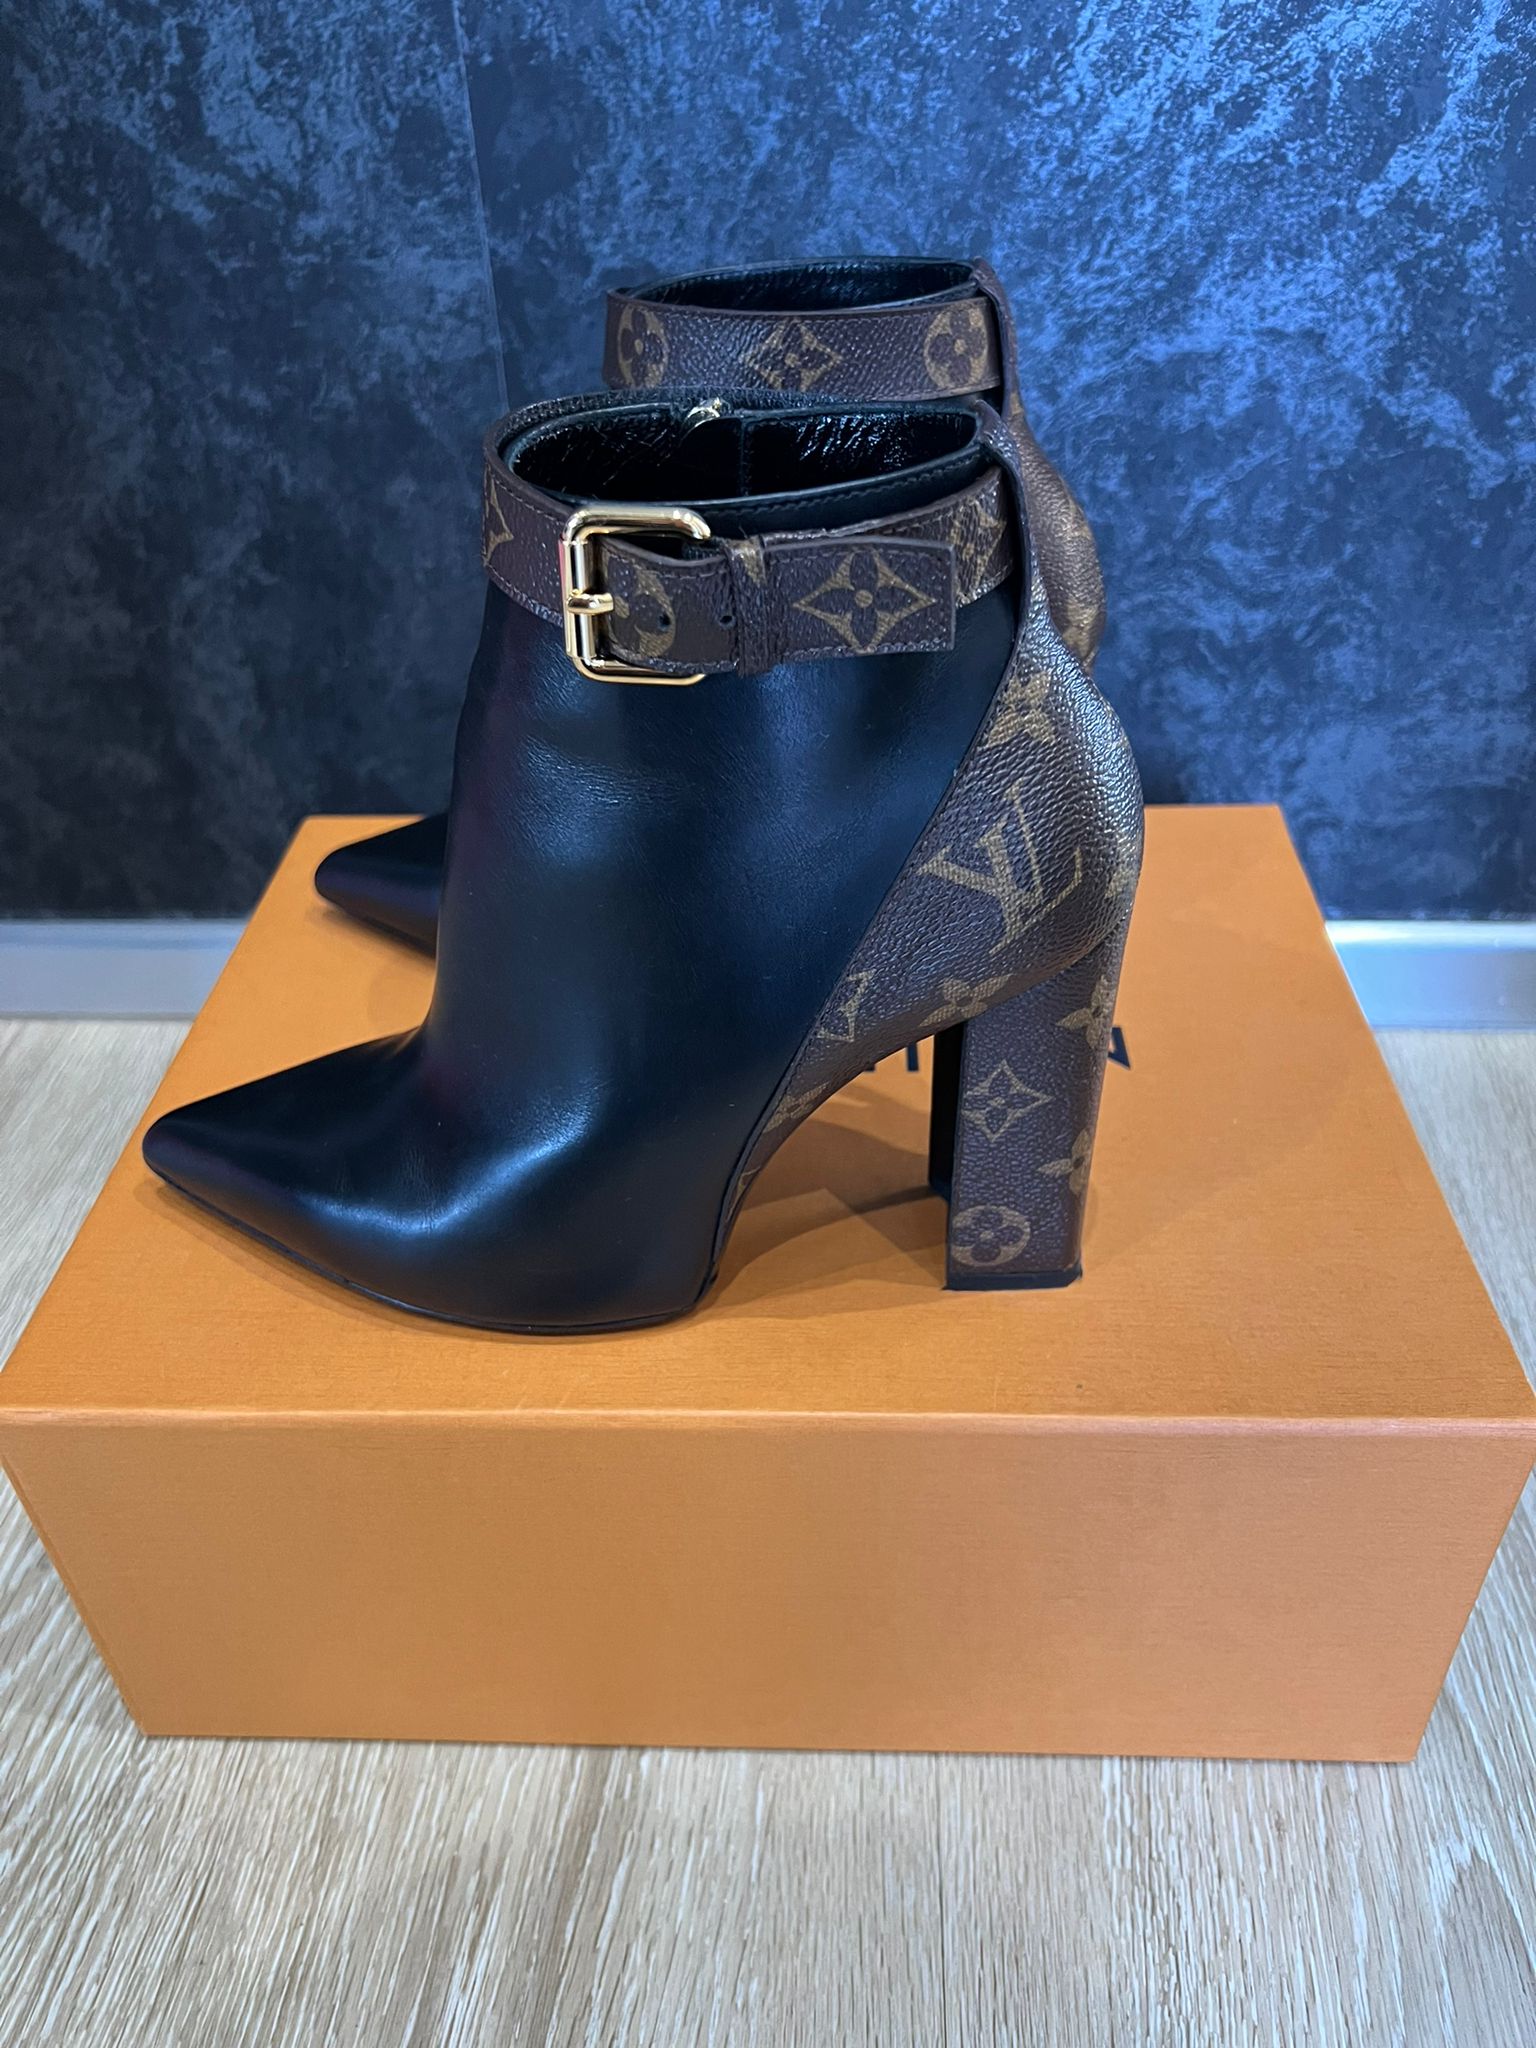 Louis Vuitton - Authenticated Matchmake Ankle Boots - Leather Black Plain for Women, Very Good Condition